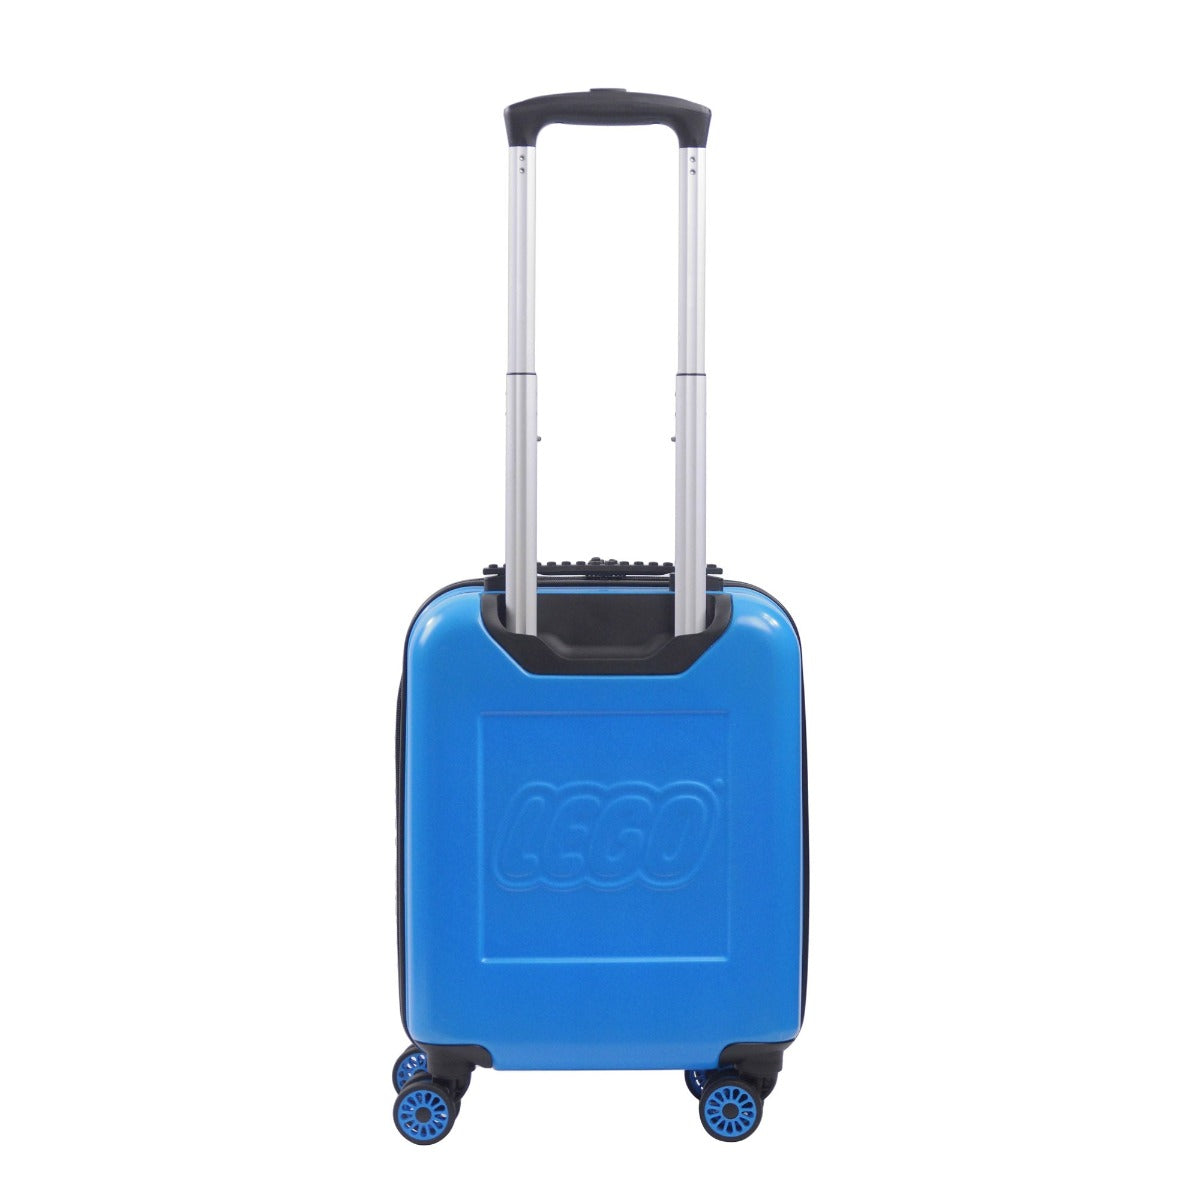 Light Blue Lego Play Date Minifigures Today I Feel 18-inch carry-on rolling luggage for kids